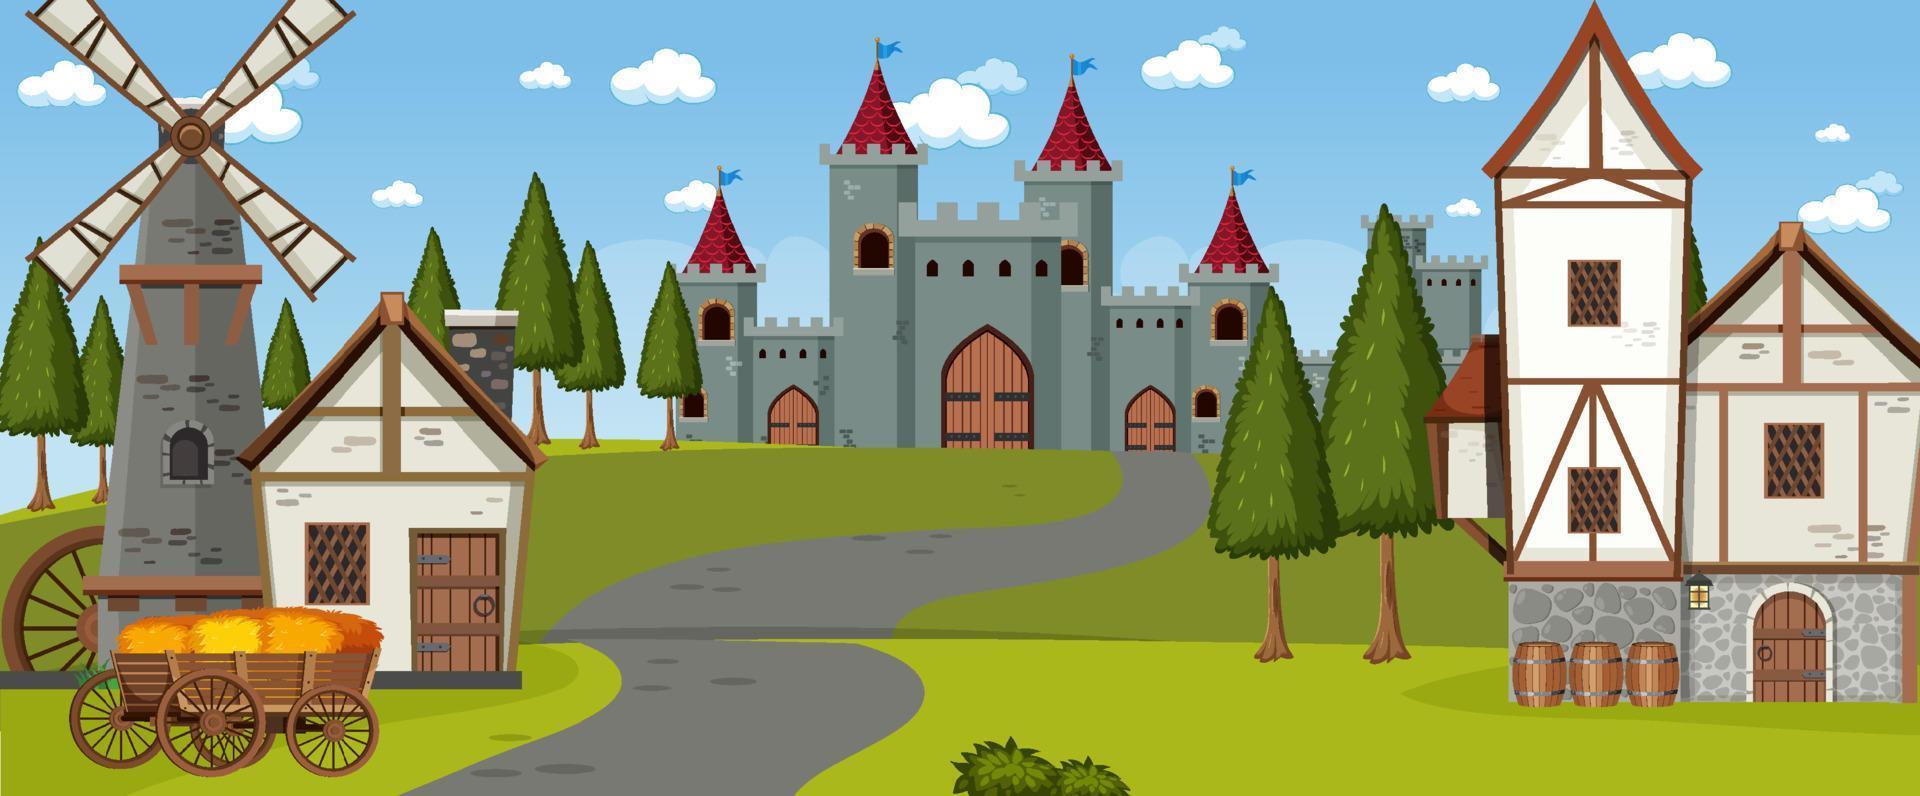 Landscape scene with medieval town vector